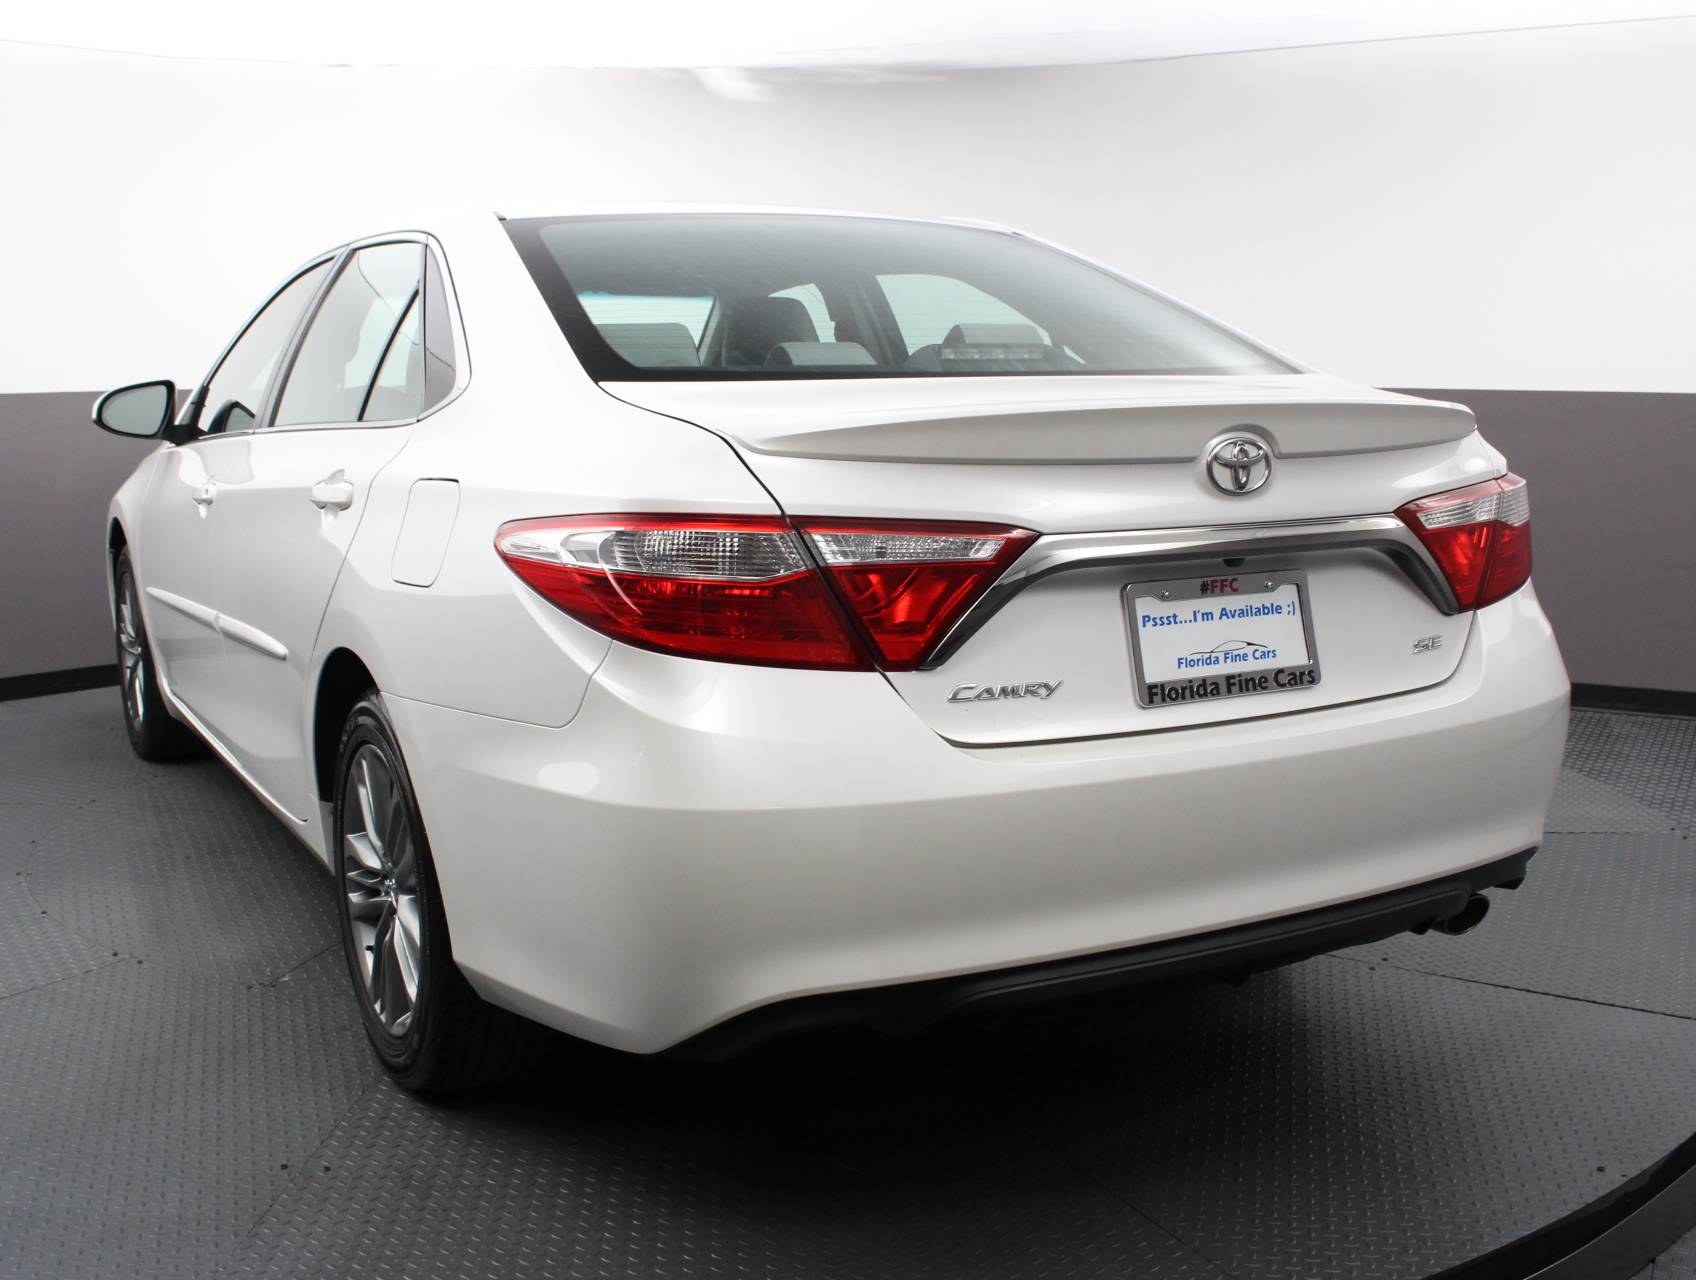 Florida Fine Cars - Used Toyota Camry 2015 WEST PALM SE